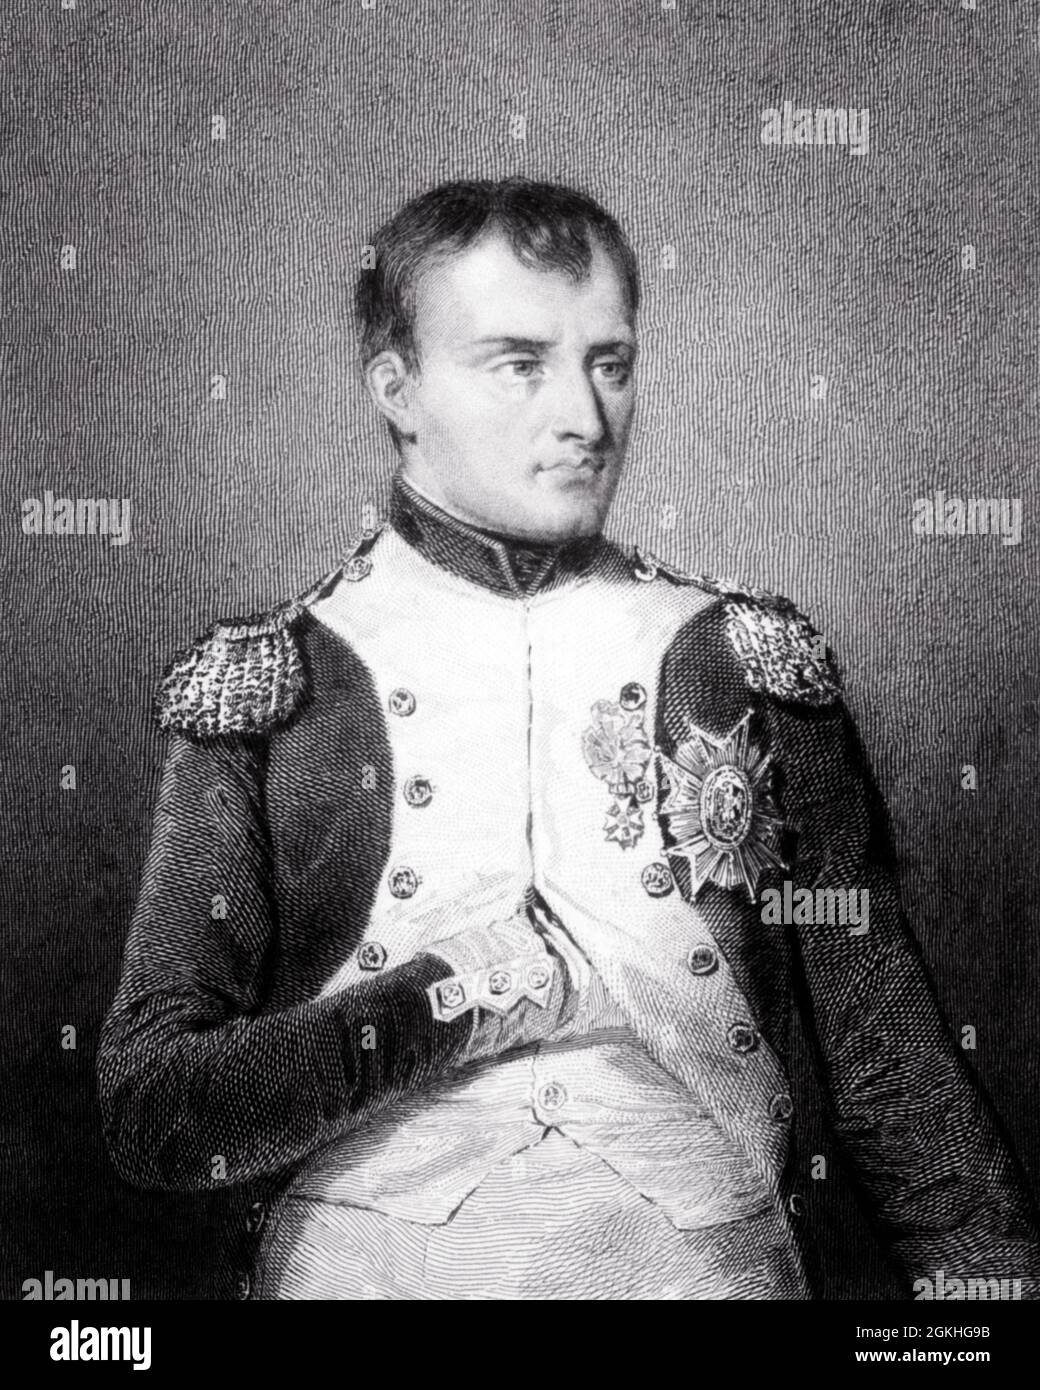 1800s 1812 PORTRAIT NAPOLEON I EMPEROR OF FRANCE 1804-1814 AND 1815 IN HIS TRADITIONAL POSE BONAPARTE - q62004 CPC001 HARS B&W EYE CONTACT POLITICAL NAPOLEON 1812 BONAPARTE HIS STRATEGY LEADERSHIP POLITICS UNIFORMS 19TH CENTURY ARTS CONTROVERSIAL STYLISH TUCKED RIGHT HAND CHAMBERS EMPEROR NAPOLEONIC CODE POSE BLACK AND WHITE CELEBRATED OLD FASHIONED Stock Photo